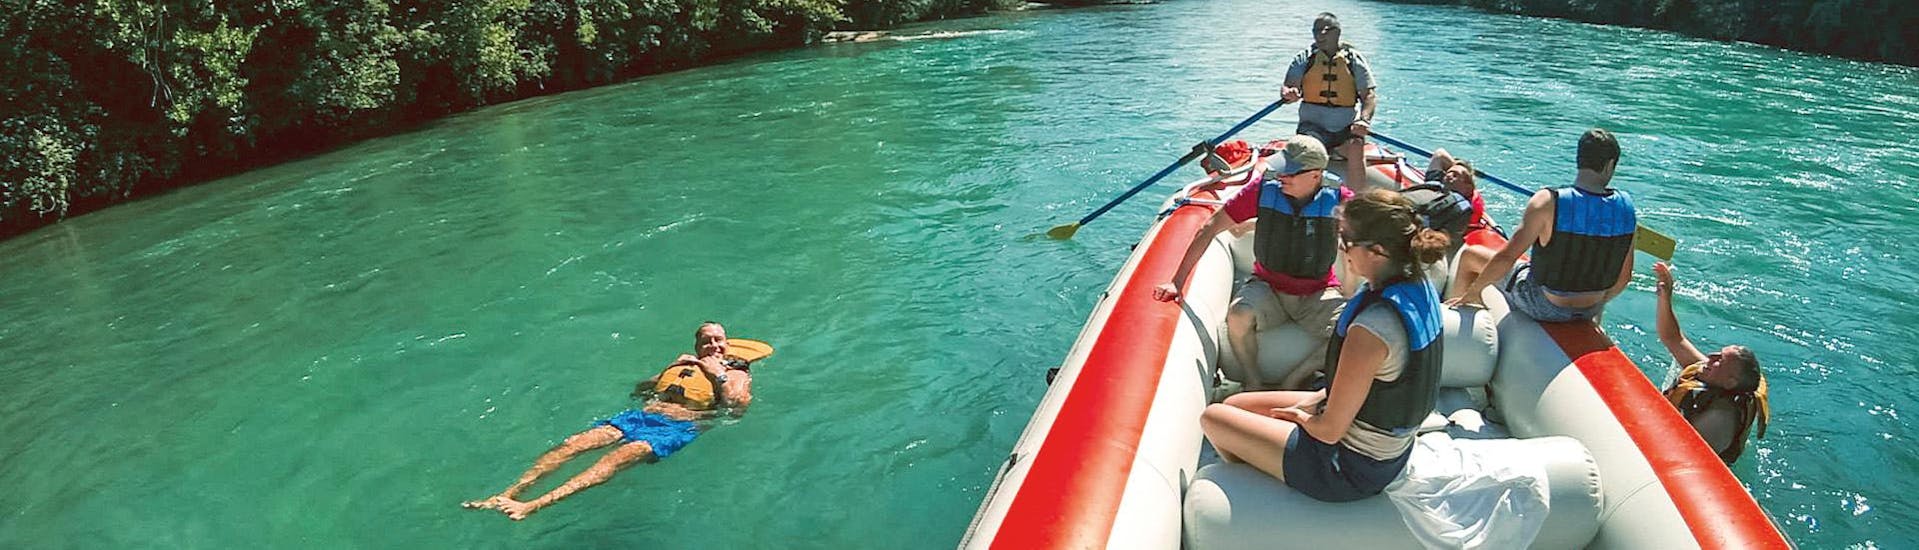 Relaxed Rafting on the Aare River.